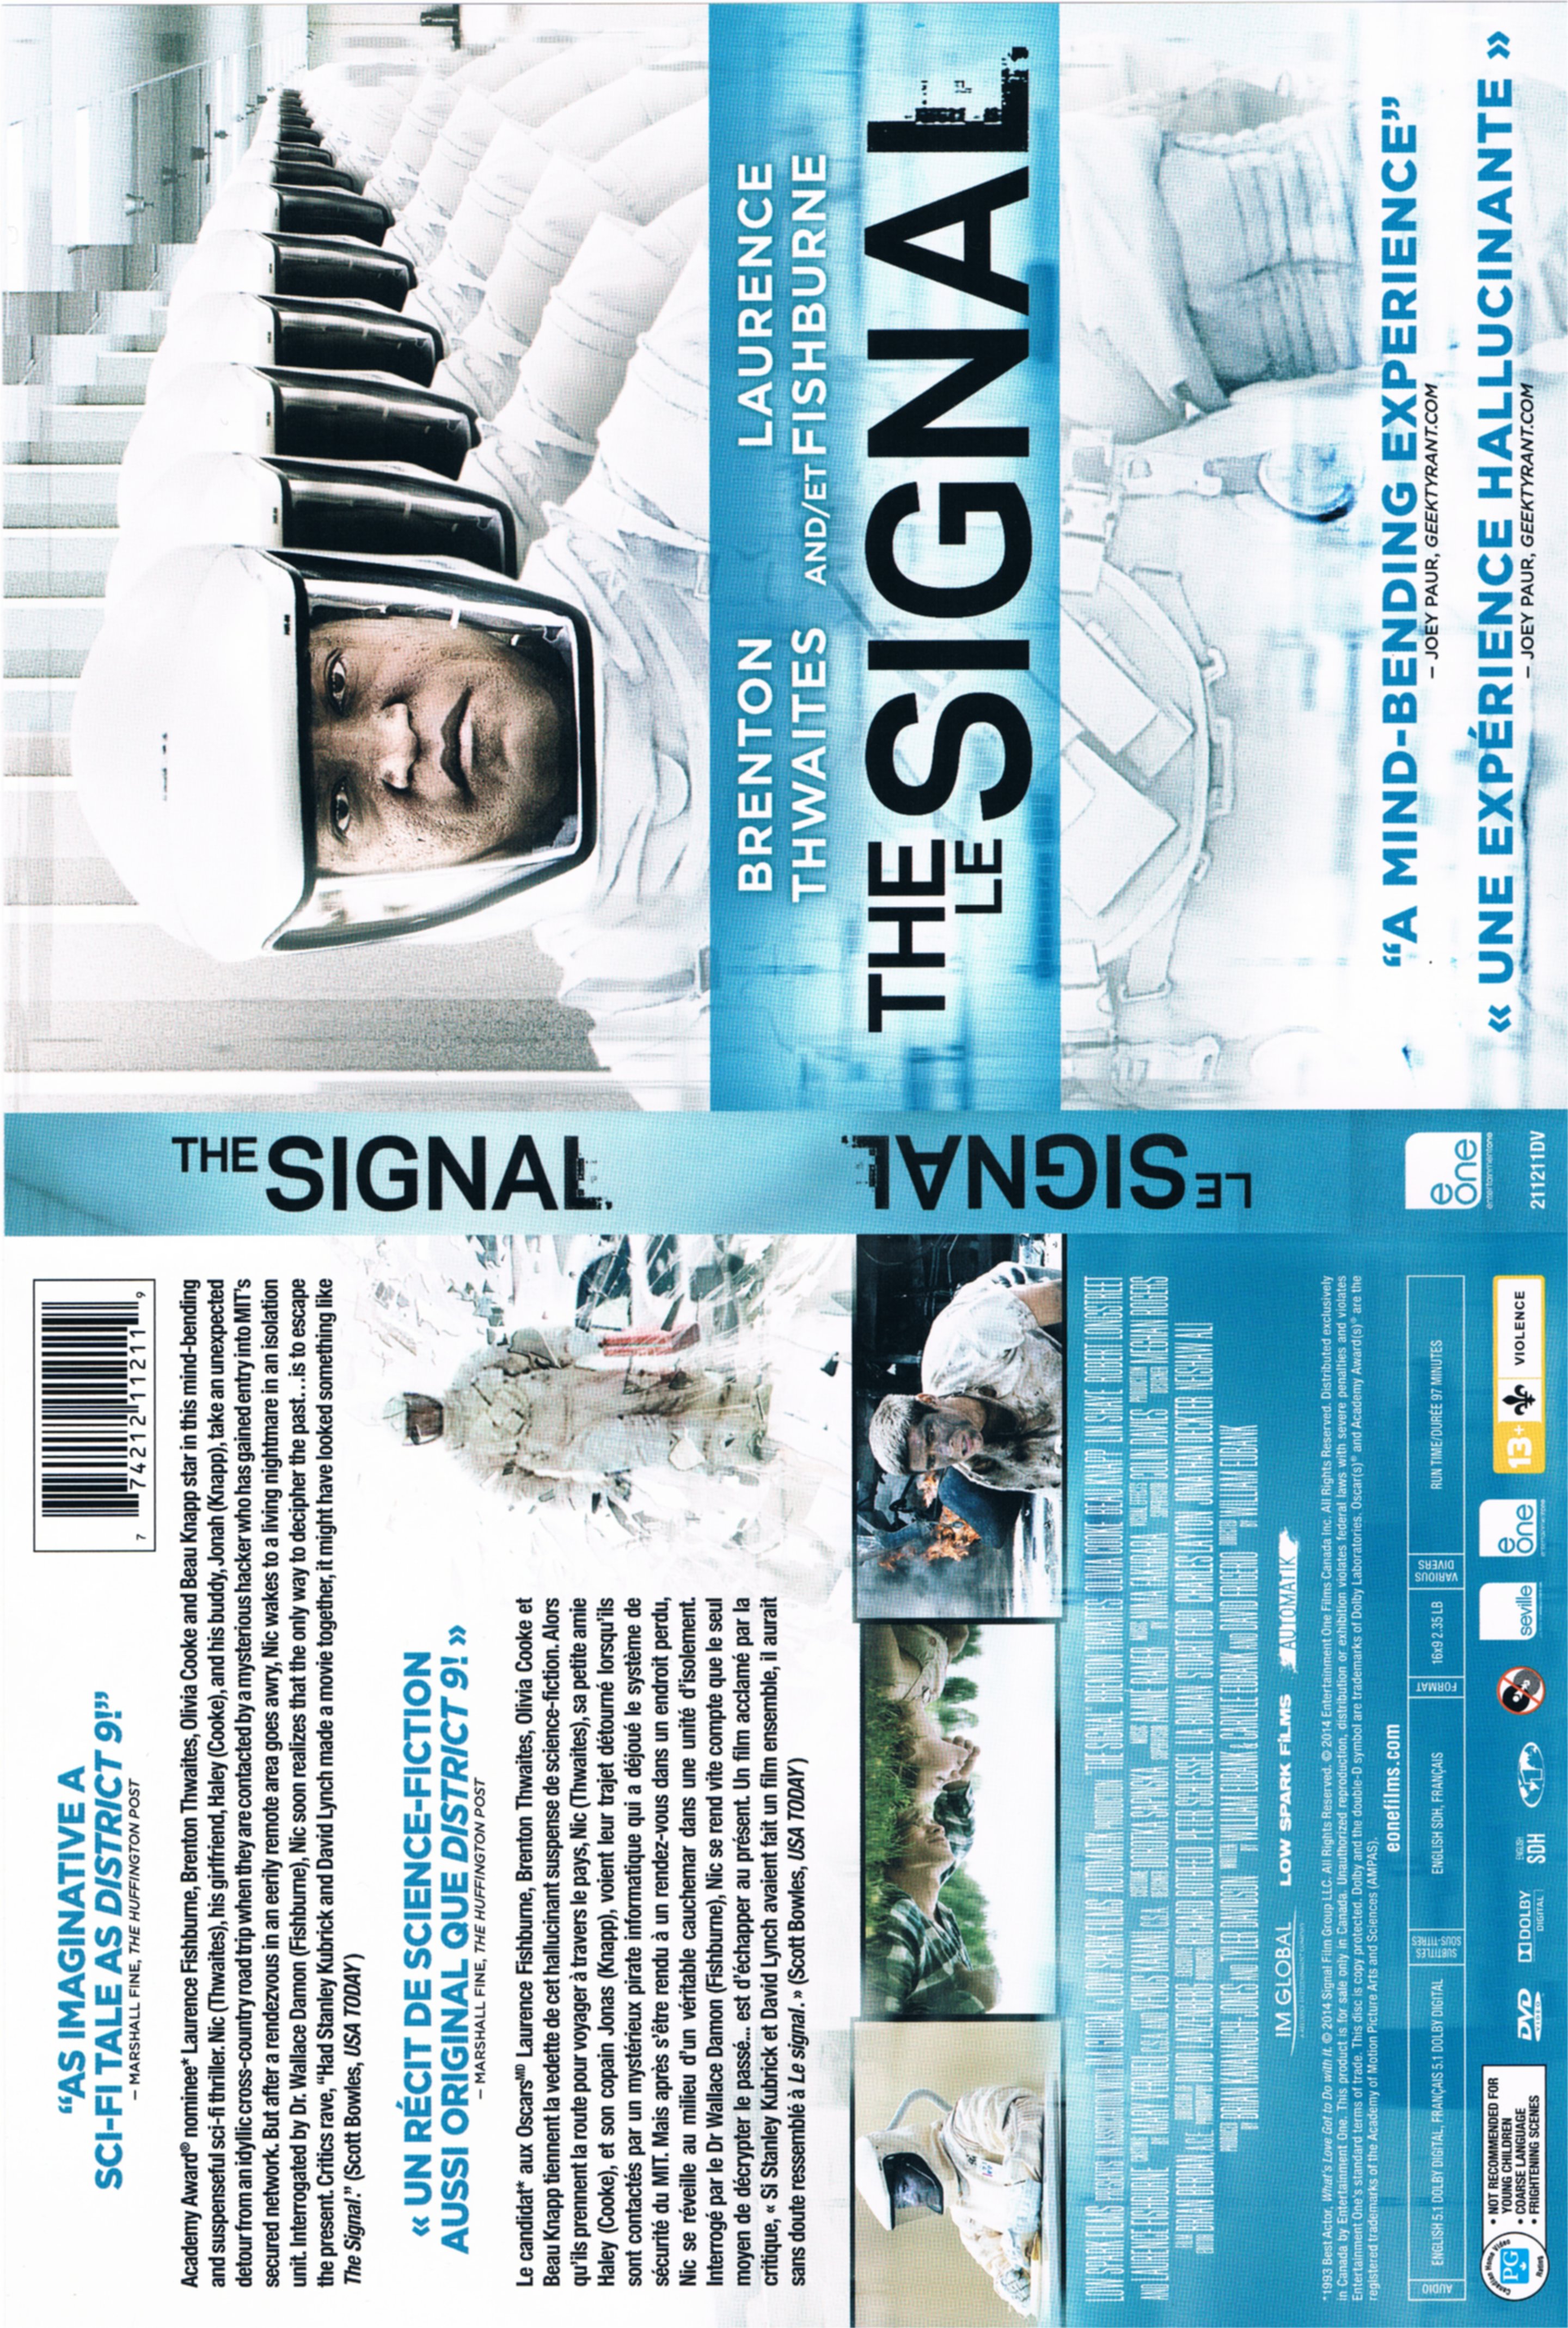 Jaquette DVD Le signal - The signal (2014) (Canadienne)